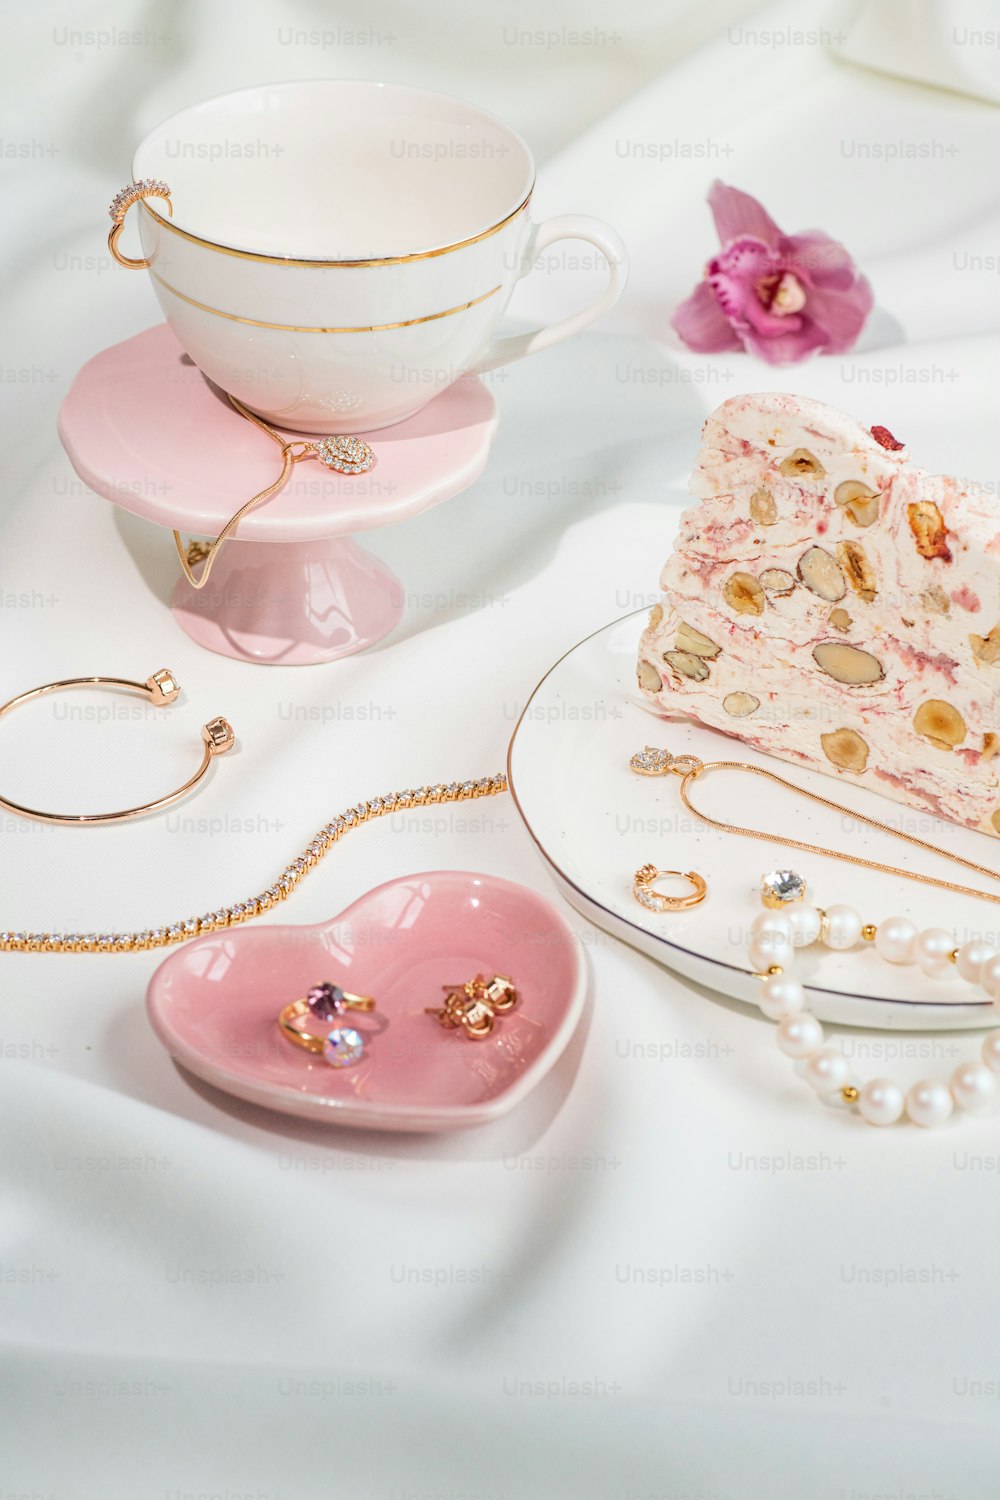 a table topped with a pink cake next to a cup and saucer